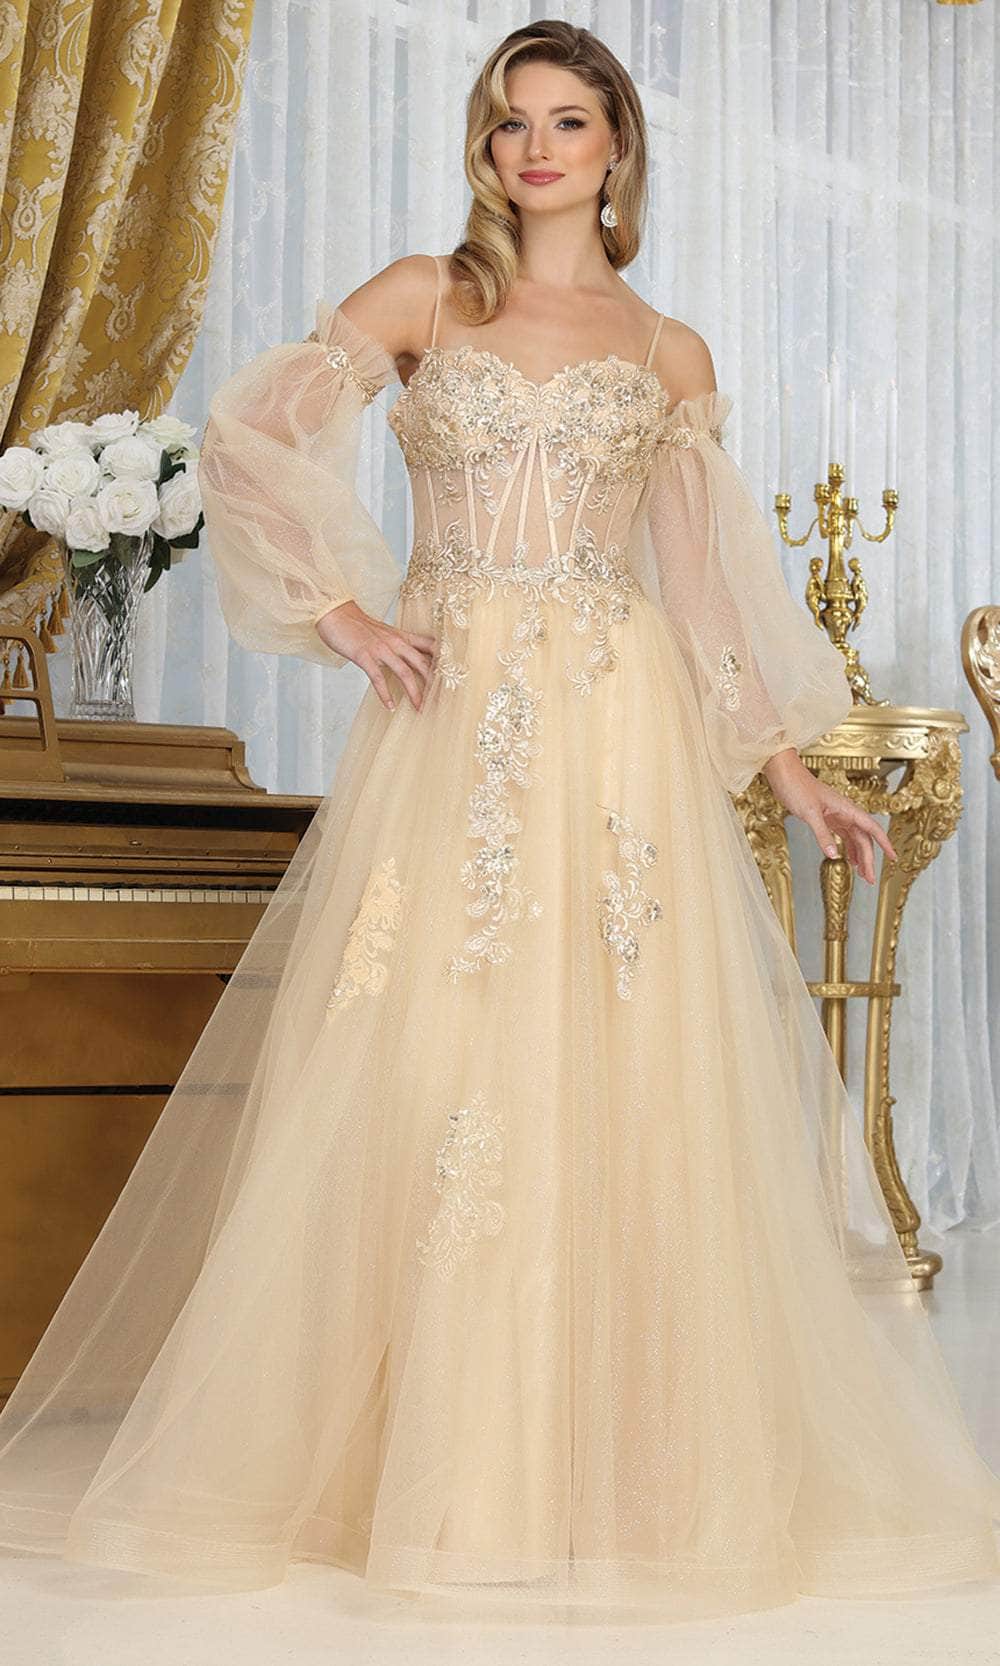 Image of May Queen RQ8073 - Sweetheart Illusion Corset Prom Gown